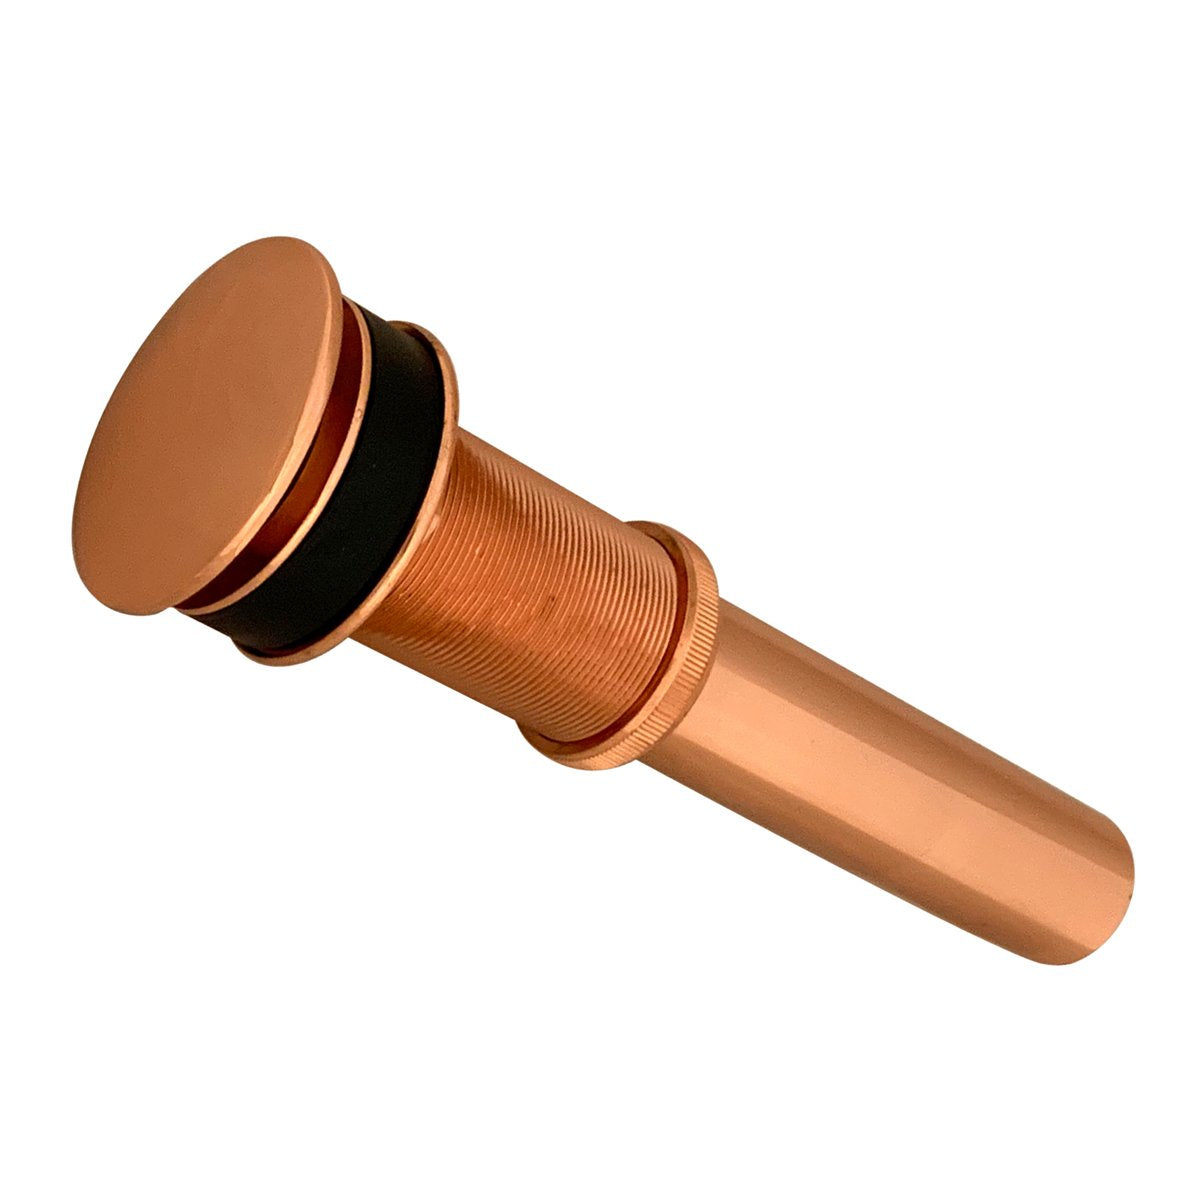 Premier Copper Products 1.5" Non-Overflow Pop-up Bathroom Sink Drain in Polished Copper